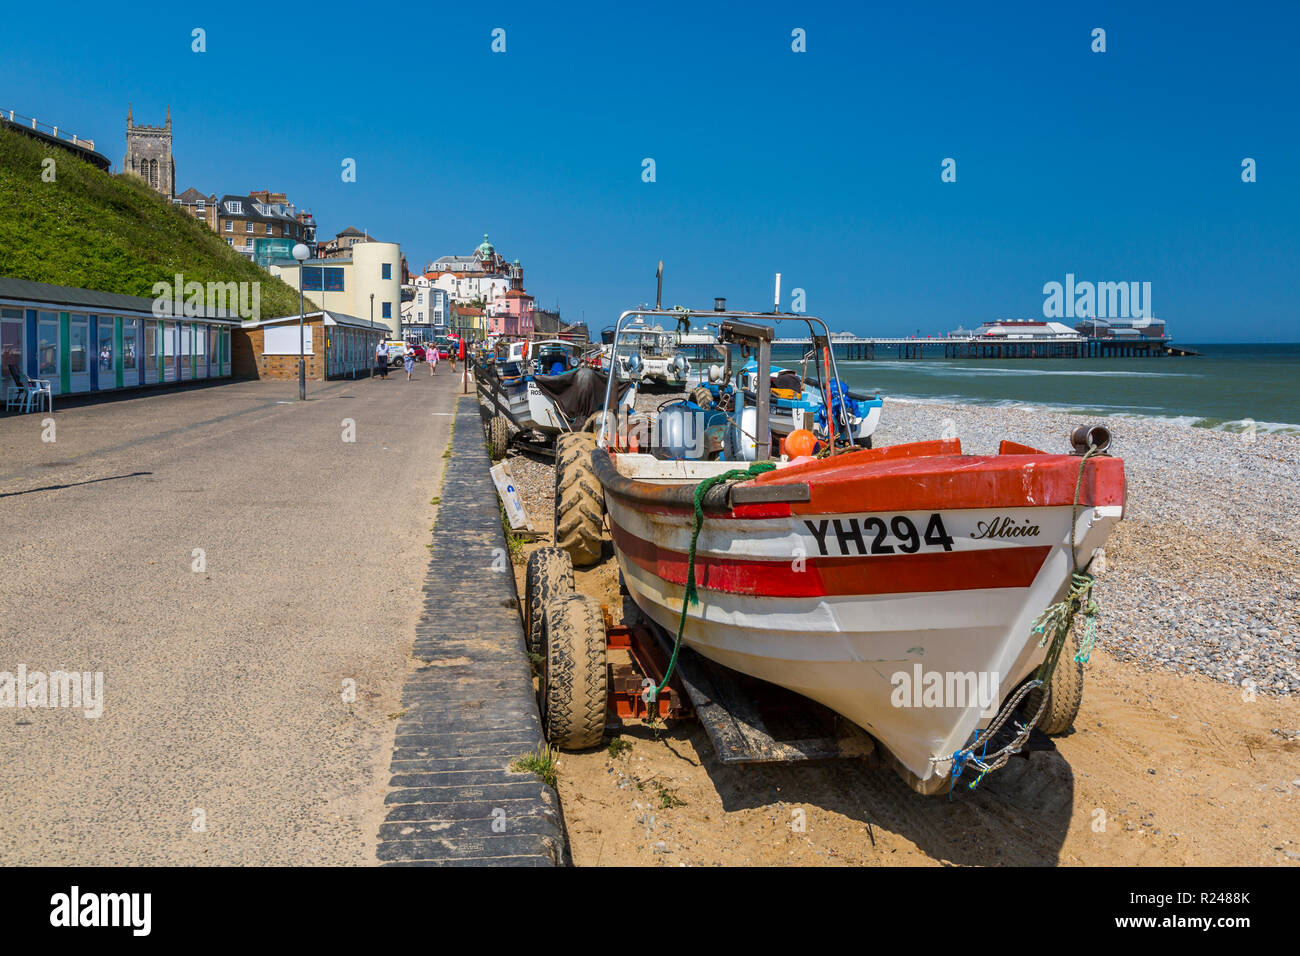 View of Cromer Pier and boats on shingle beach on a summer day, Cromer, Norfolk, England, United Kingdom, Europe Stock Photo